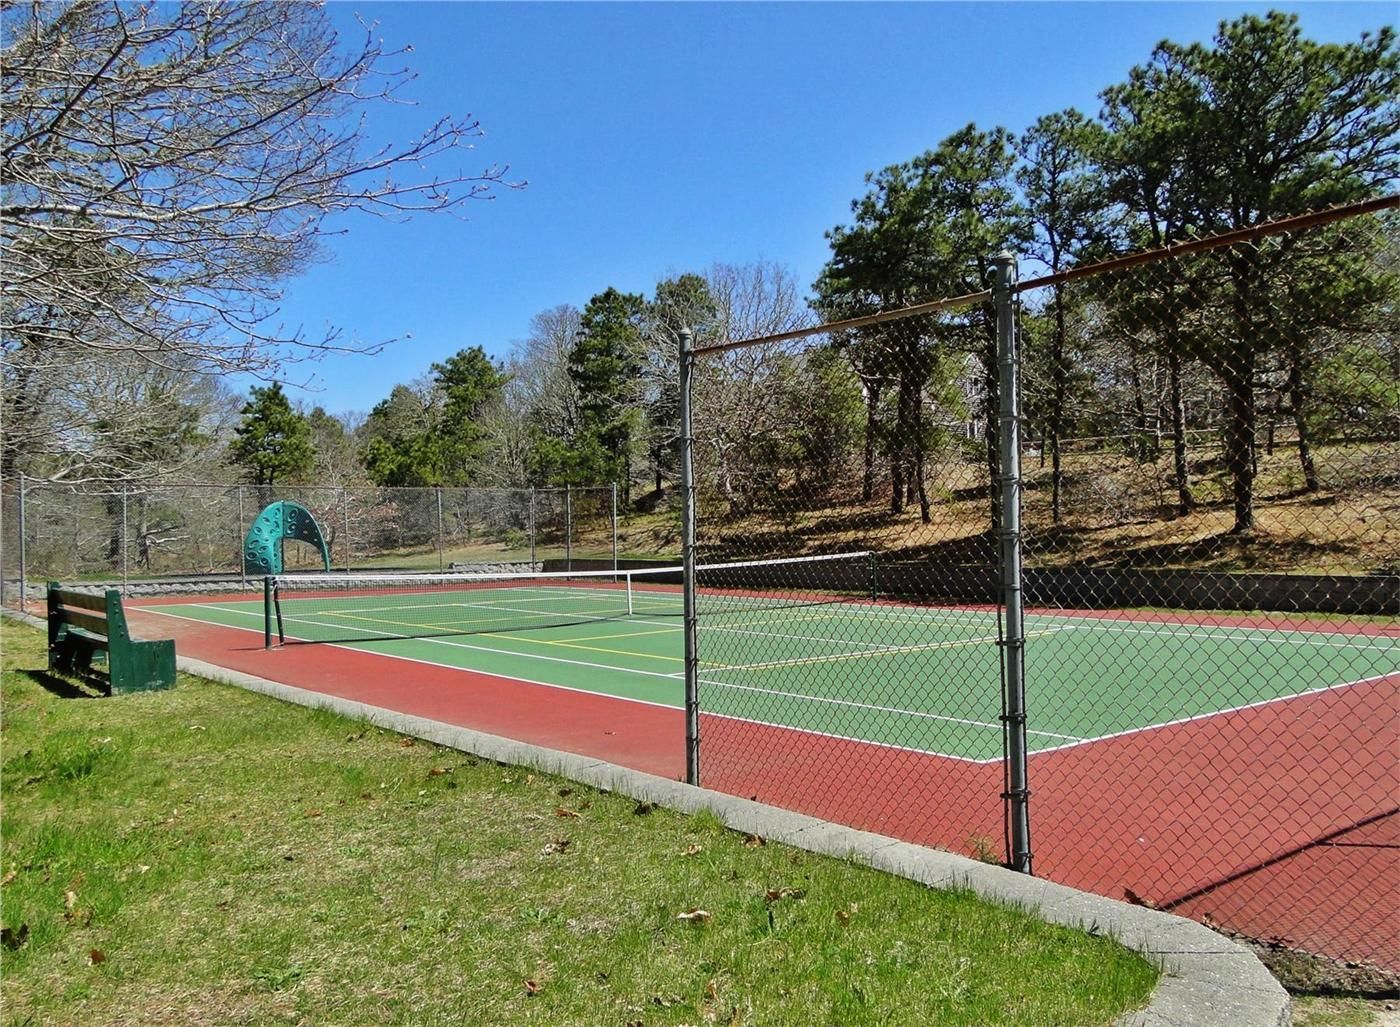 Tennis courts available close by